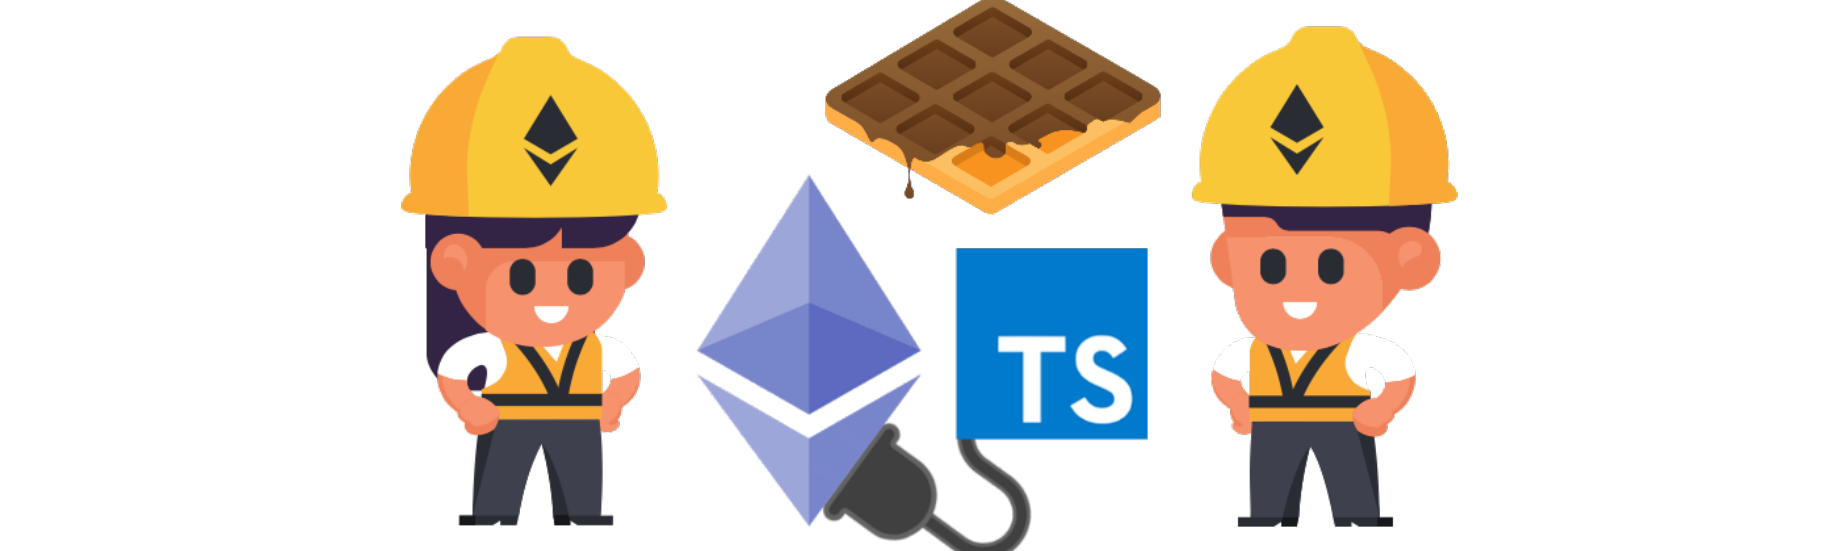 Solidity Hardhat Typescript Waffle Graphic